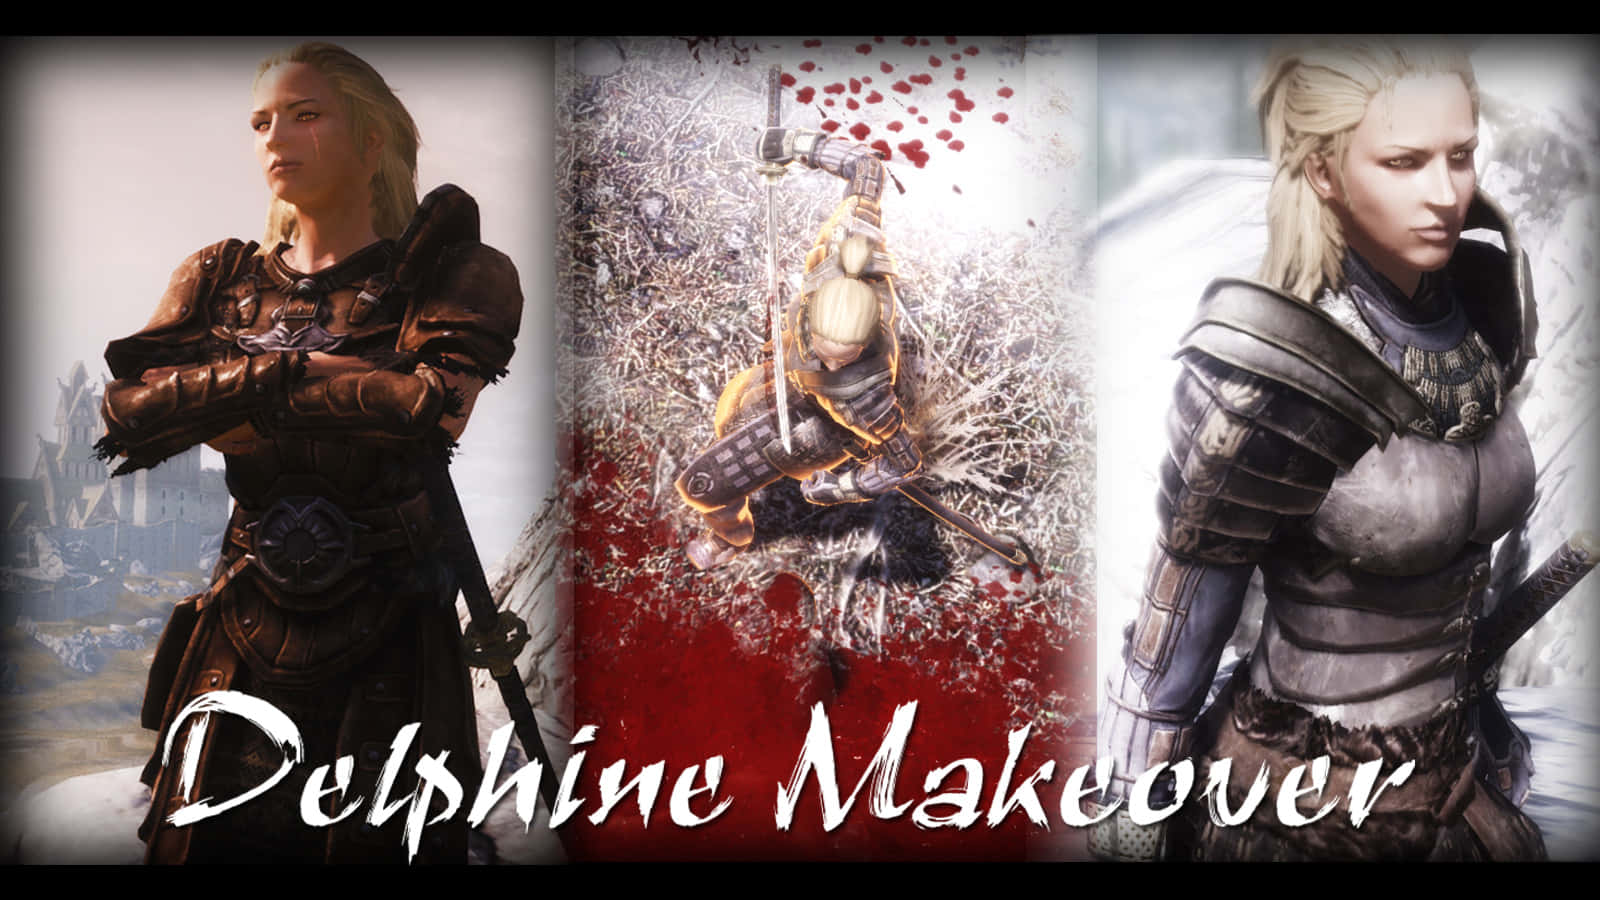 Delphine, the Blades agent in disguise, prepared for action in The Elder Scrolls V: Skyrim. Wallpaper